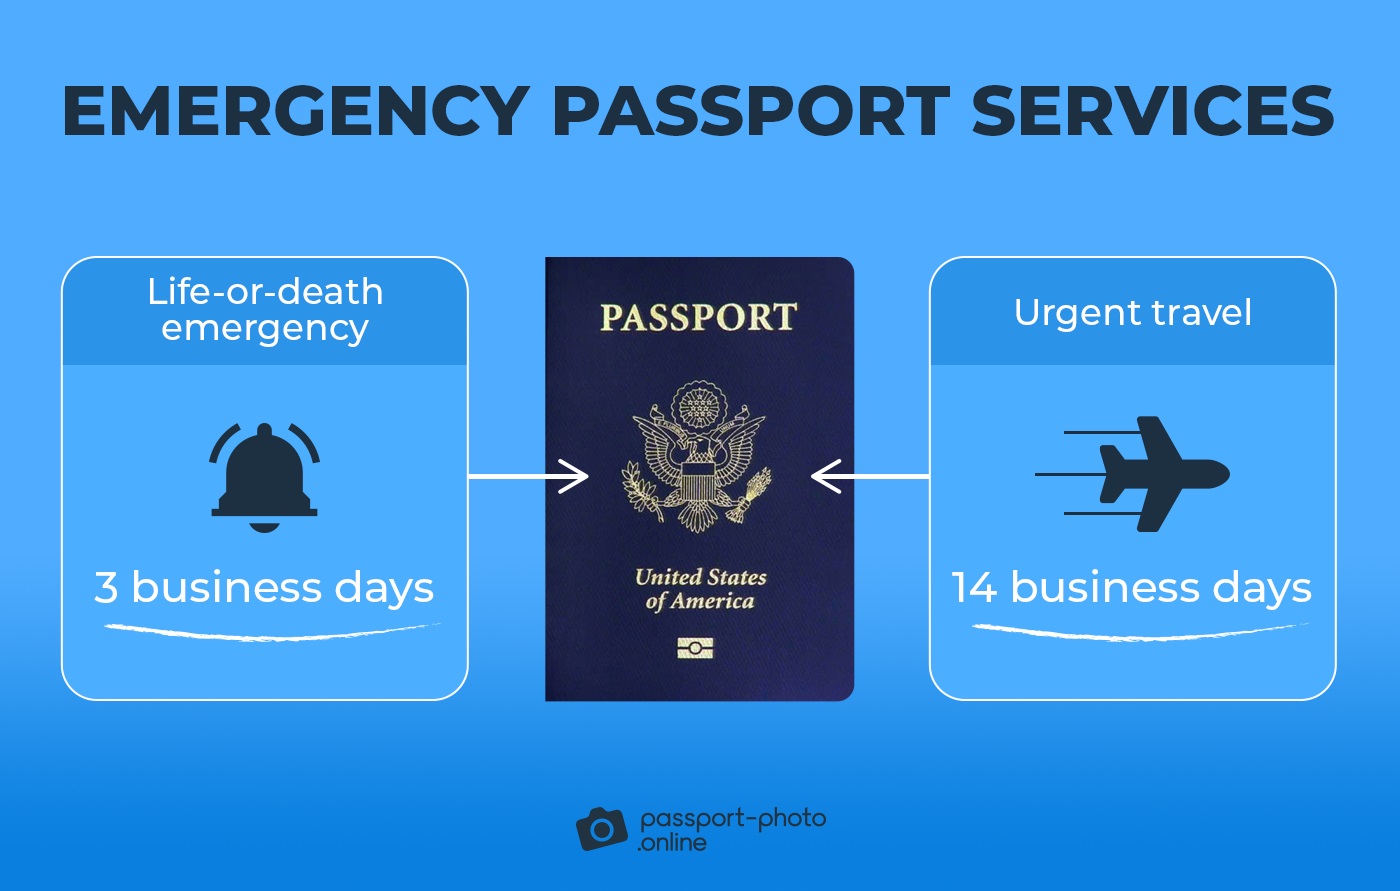 an image of 2 expedited passport services: life-or-death emergency (3 business days), urgent travel (14 business days)